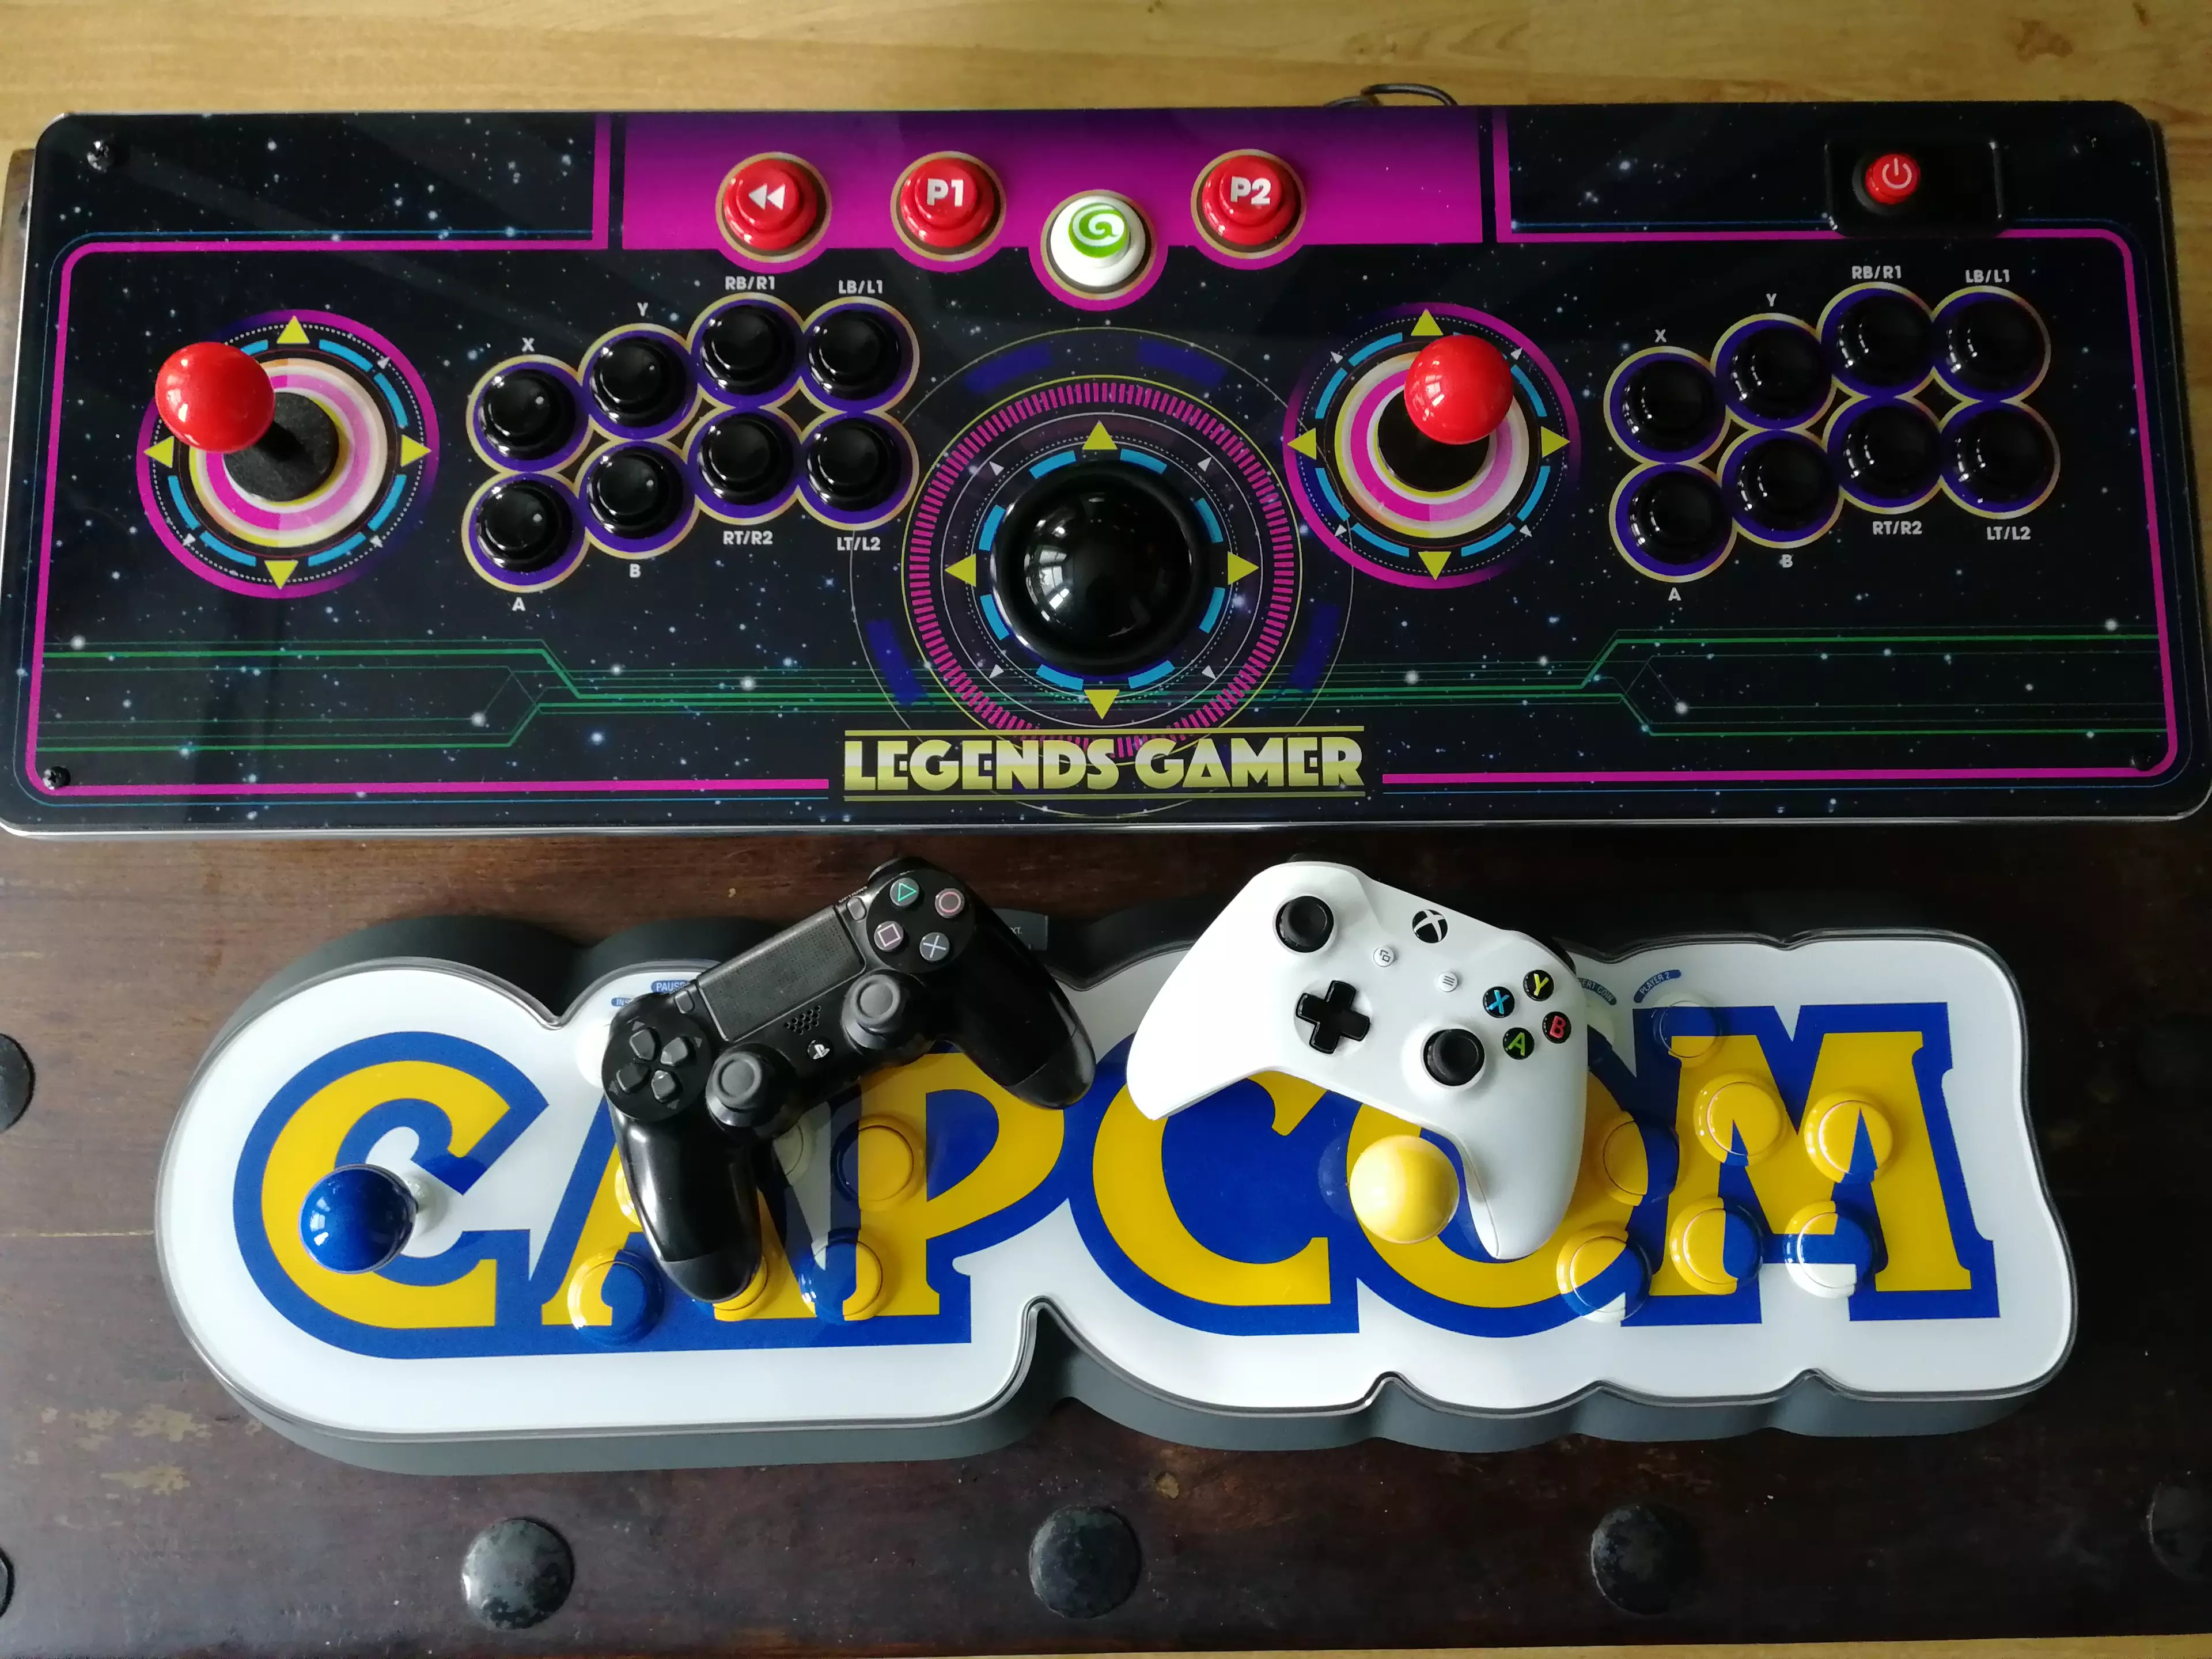 The Legends Gamer Pro next to the Capcom Home Arcade, and console controllers /